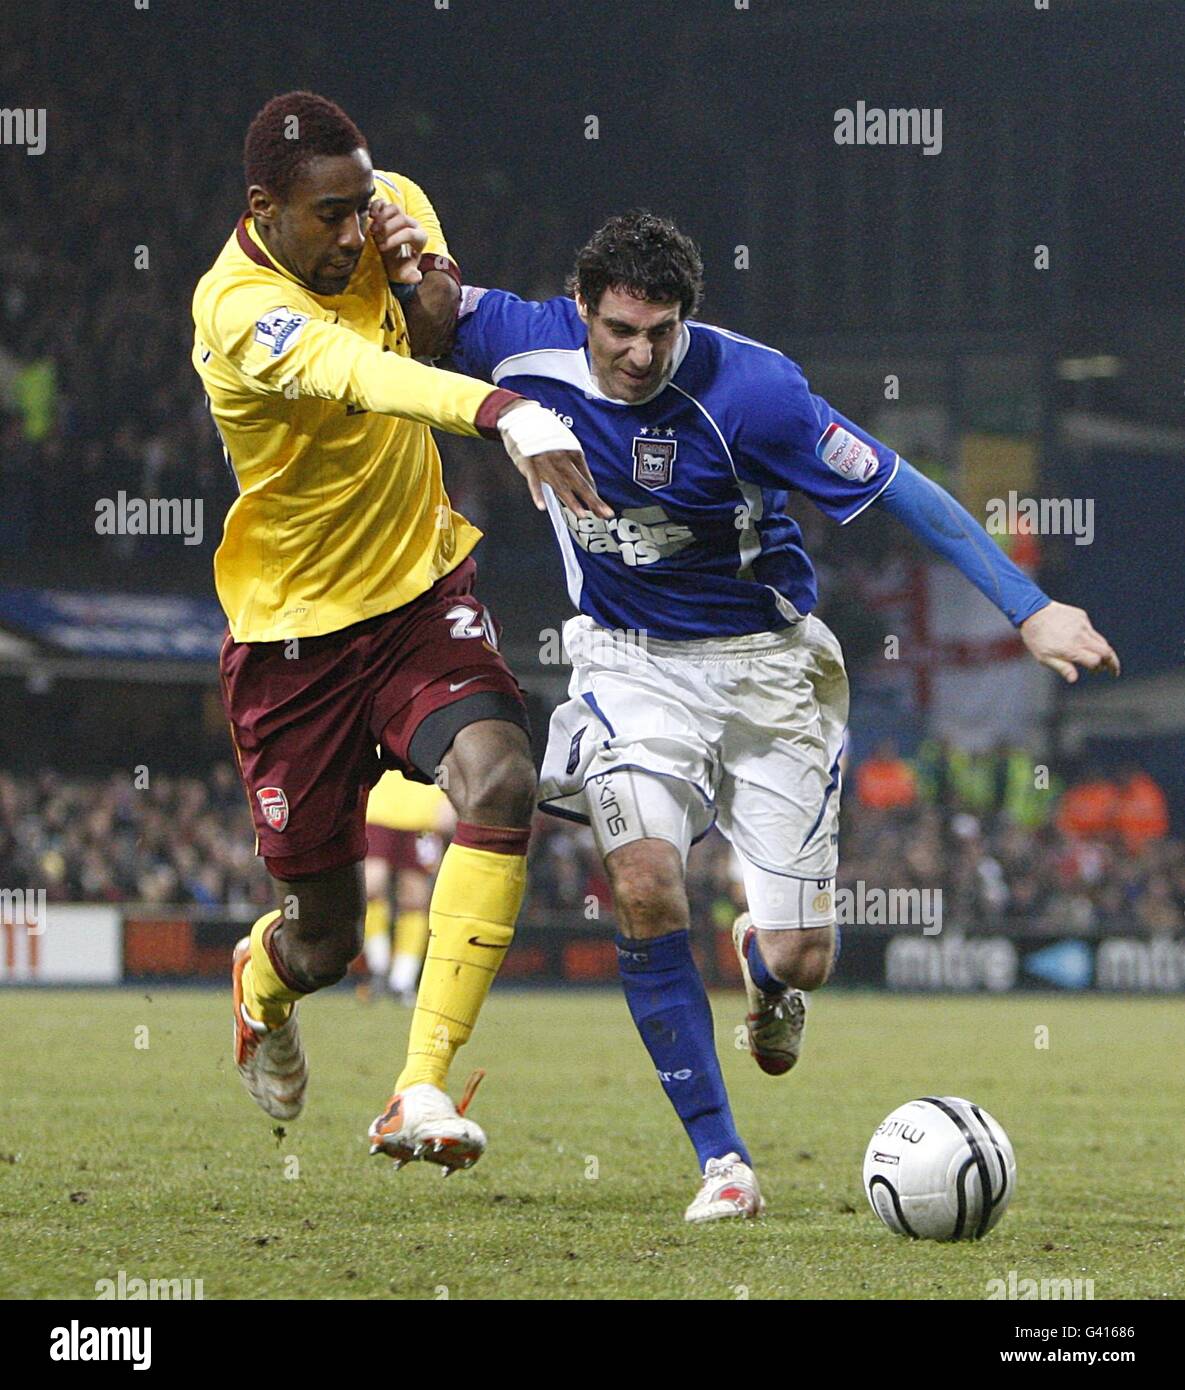 Soccer - Carling Cup - Semi Final - First Leg - Ipswich Town v Arsenal - Portman Road. Ipswich Town's Mark Kennedy and Arsenal's Johan Djourou (left) battle for the ball Stock Photo